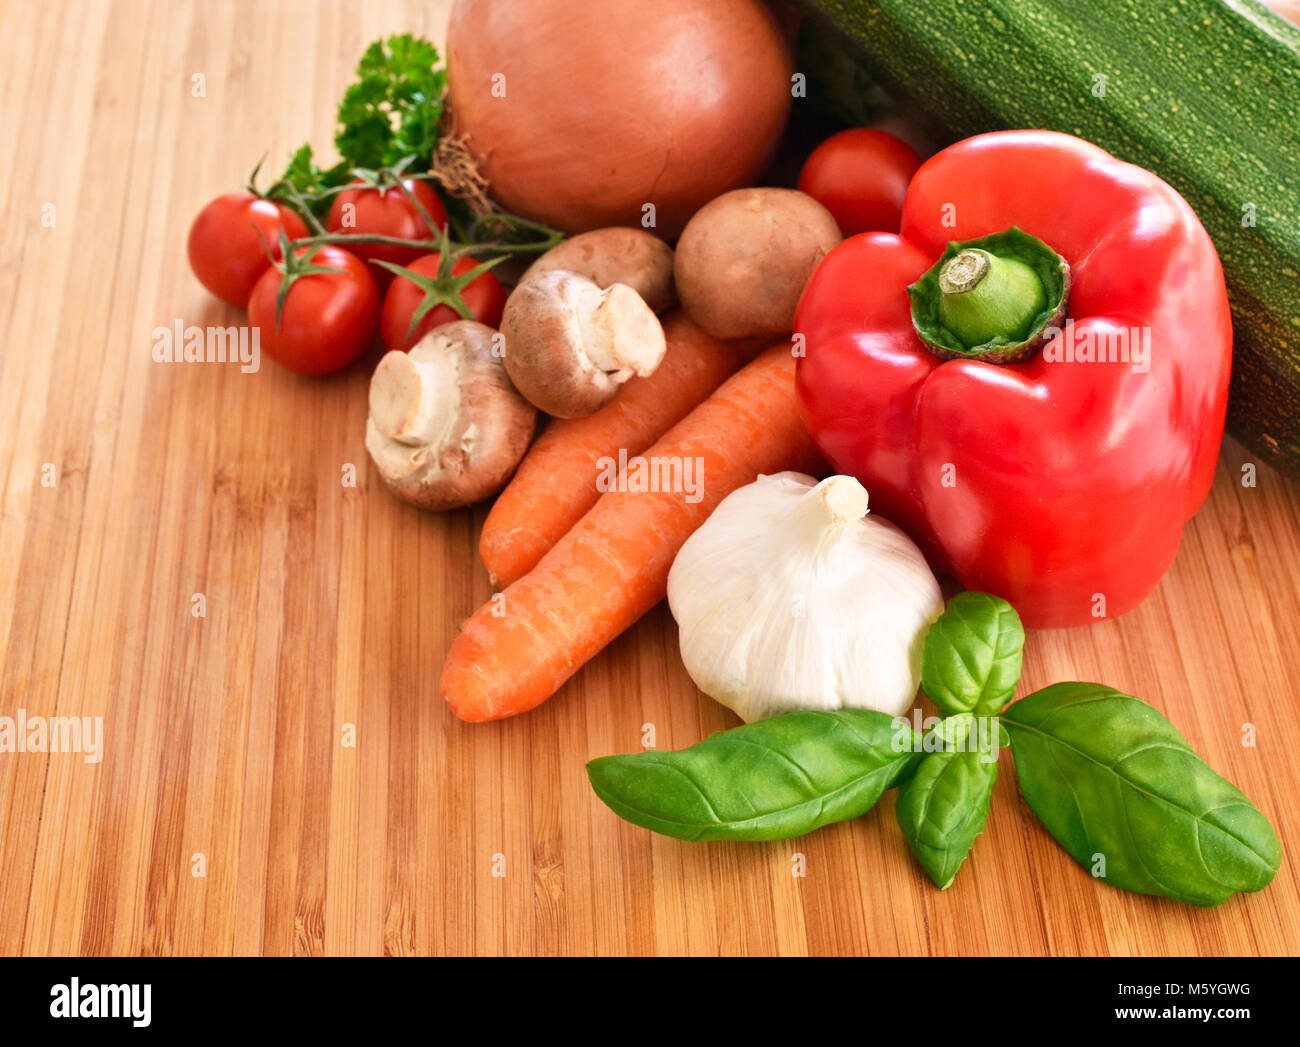 Fresh raw vegetables on a cutting board. arrangement of red bell pepper, zucchini, broccoli, salad, onion, carrots and garlic, decorated on bamboo. Stock Photo